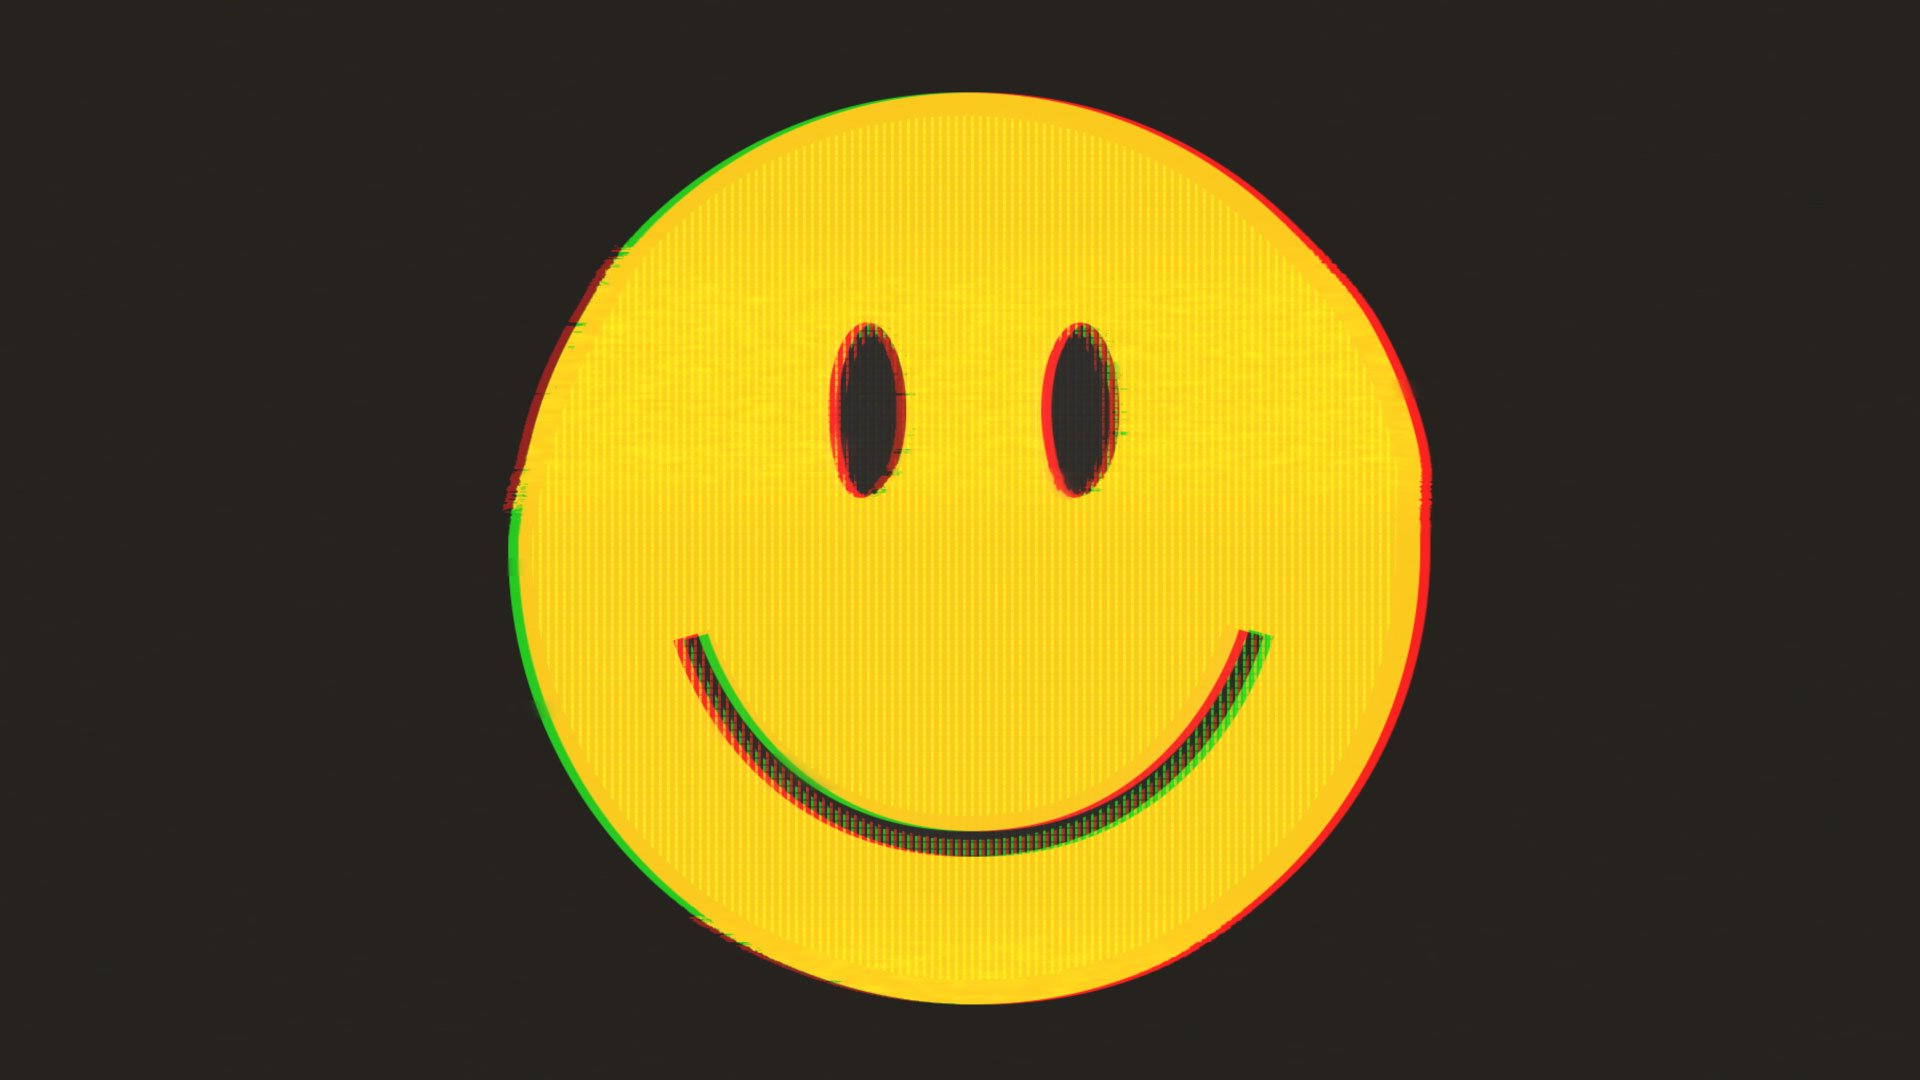 Smiley Icon Switching From Happy To Sad With Glitch Effect HD Video Clips & Stock Video Footage at Videezy!